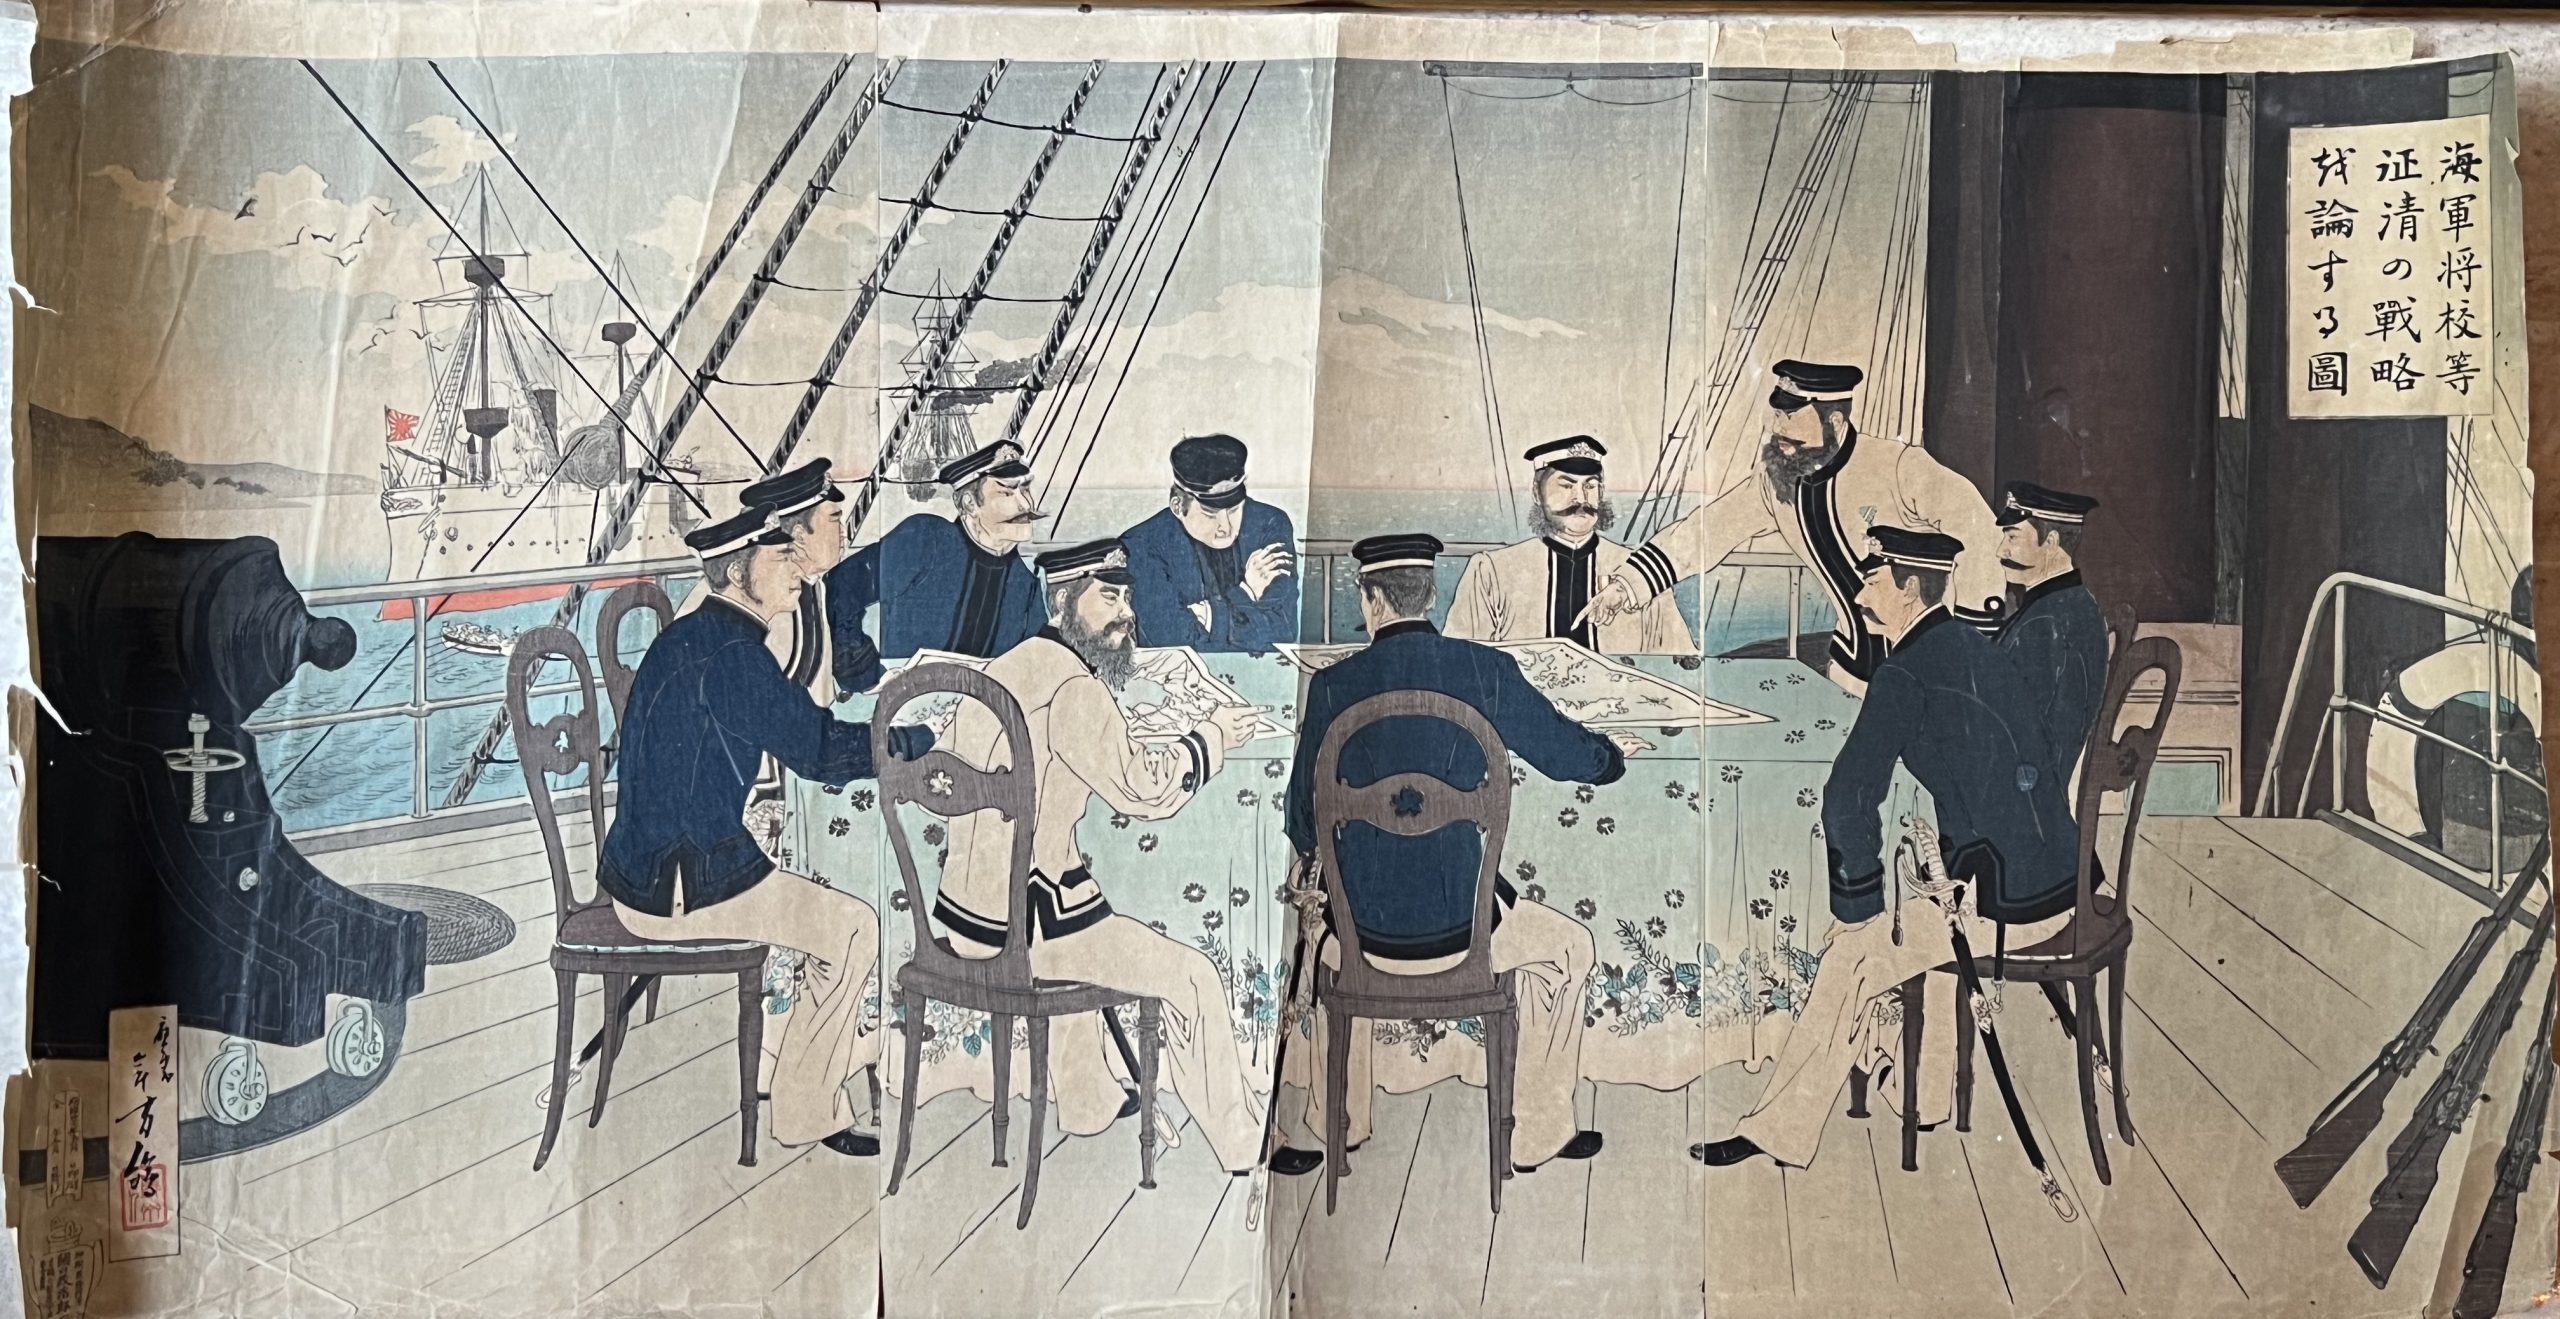 A Scene of Japanese Naval Officers Discussing the Battle Strategy